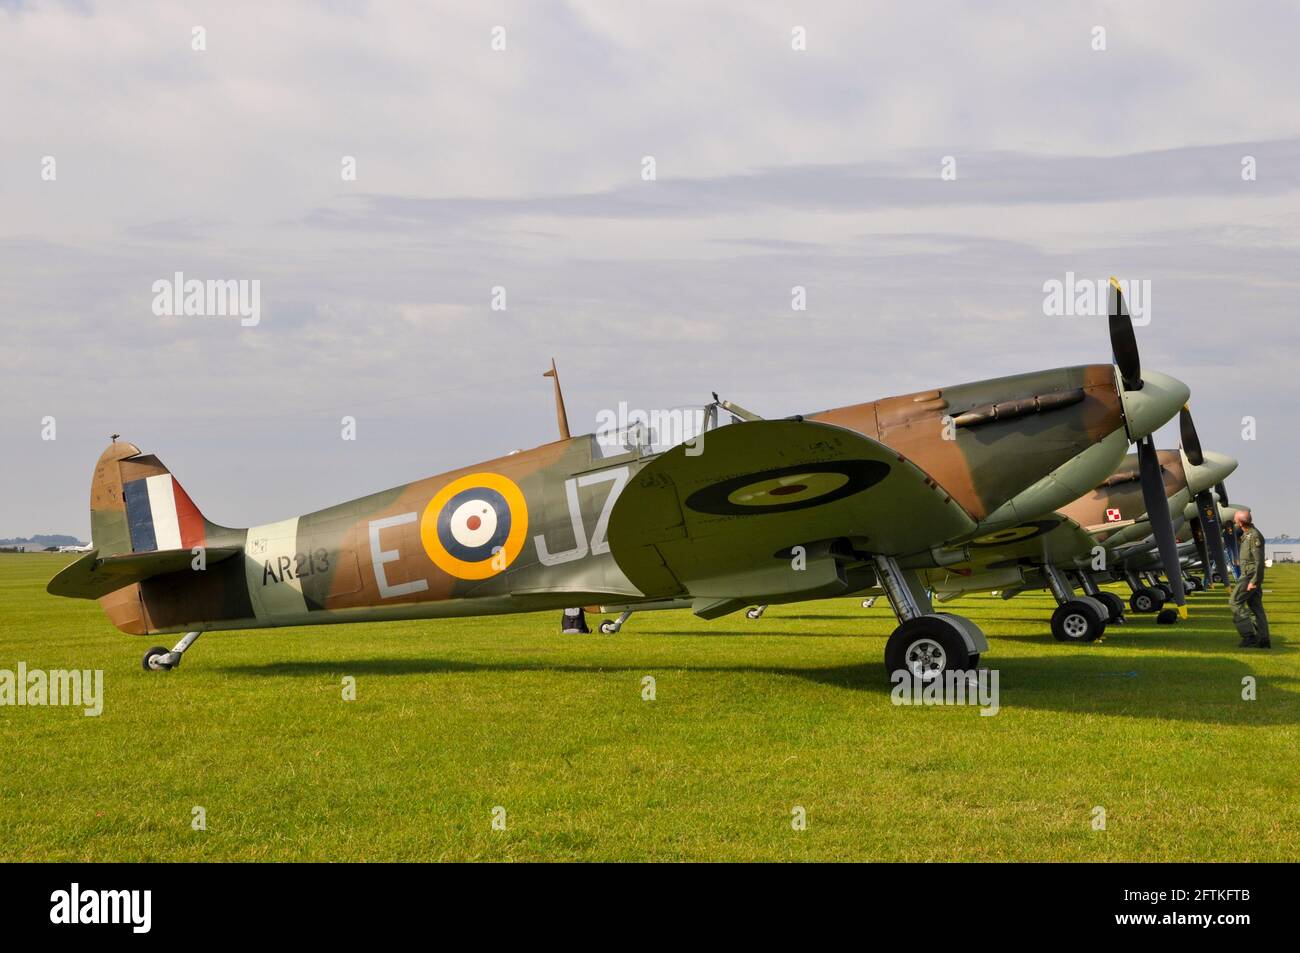 Vickers Supermarine Spitfire Mk.I fighter plane AR213 heading a line of Second World War fighter planes at Duxford, Cambridgeshire, UK. Stock Photo